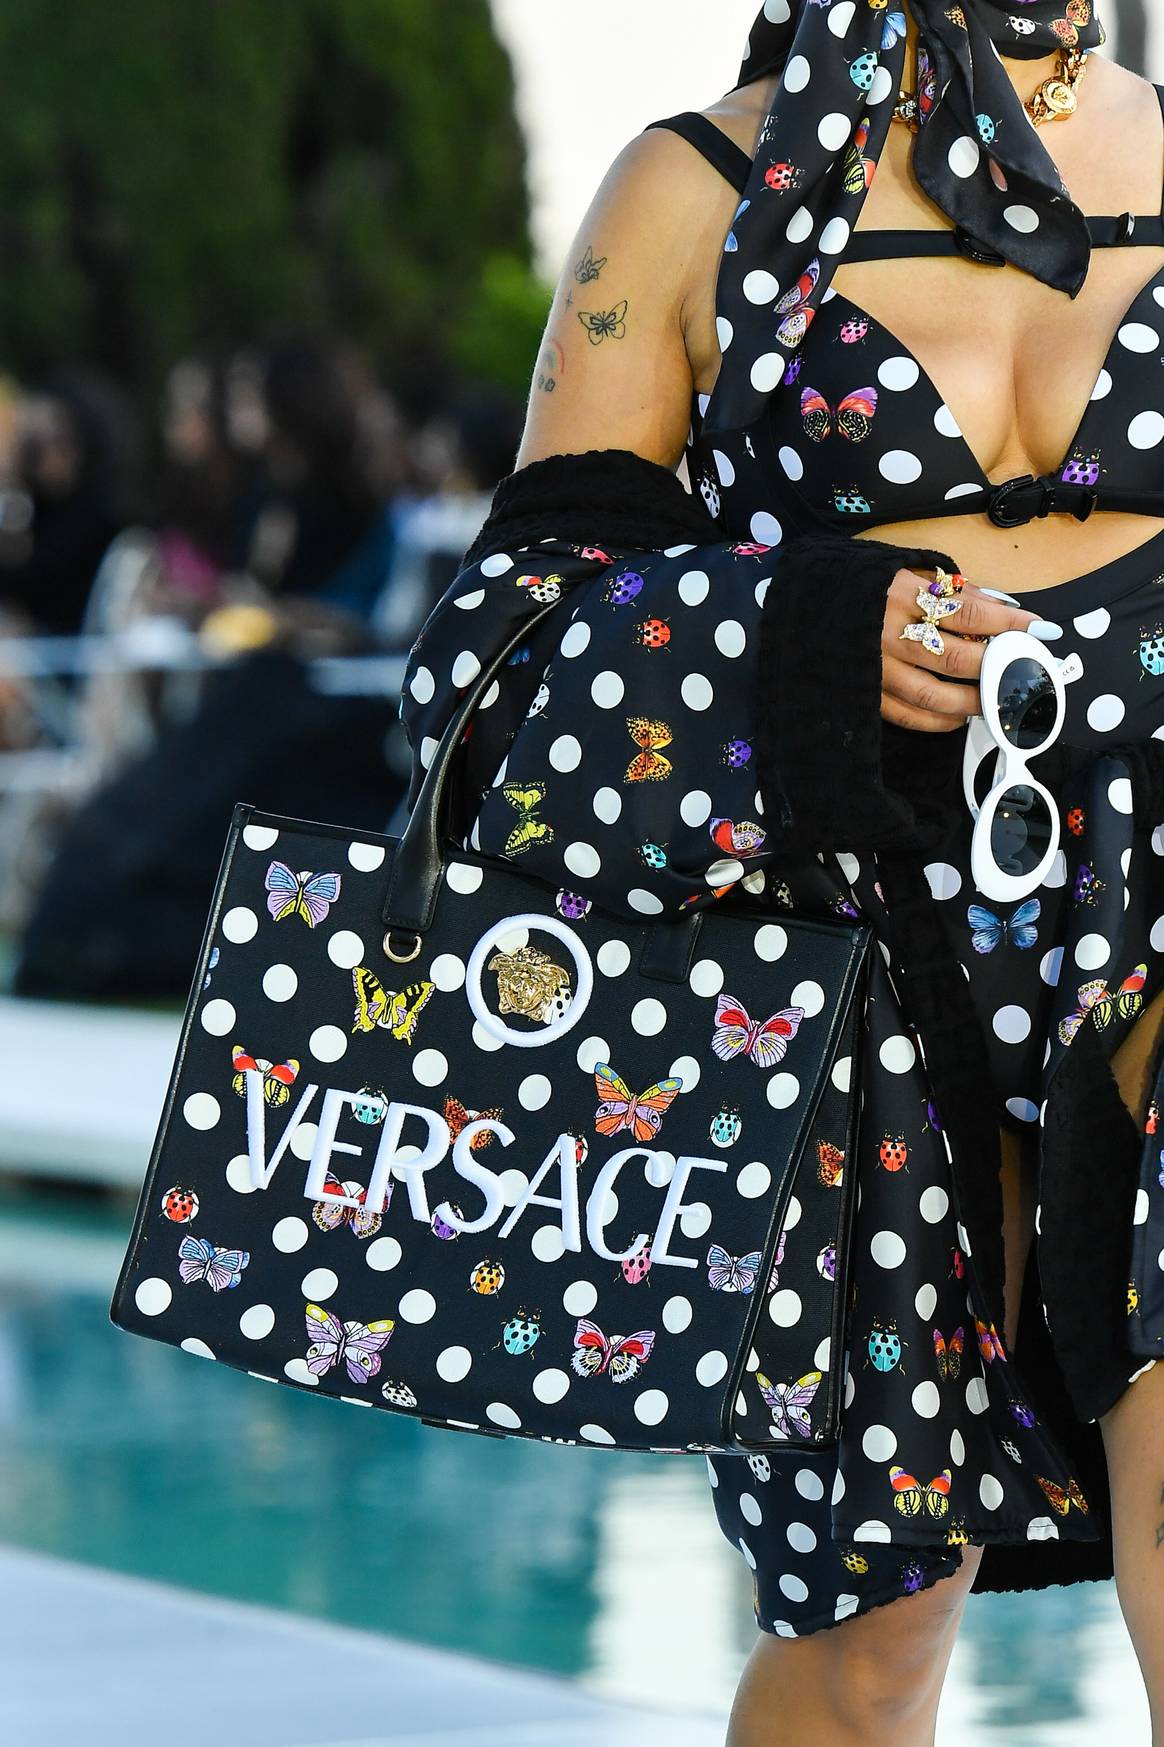 All over logo large tote bag by Versace La Vacanza